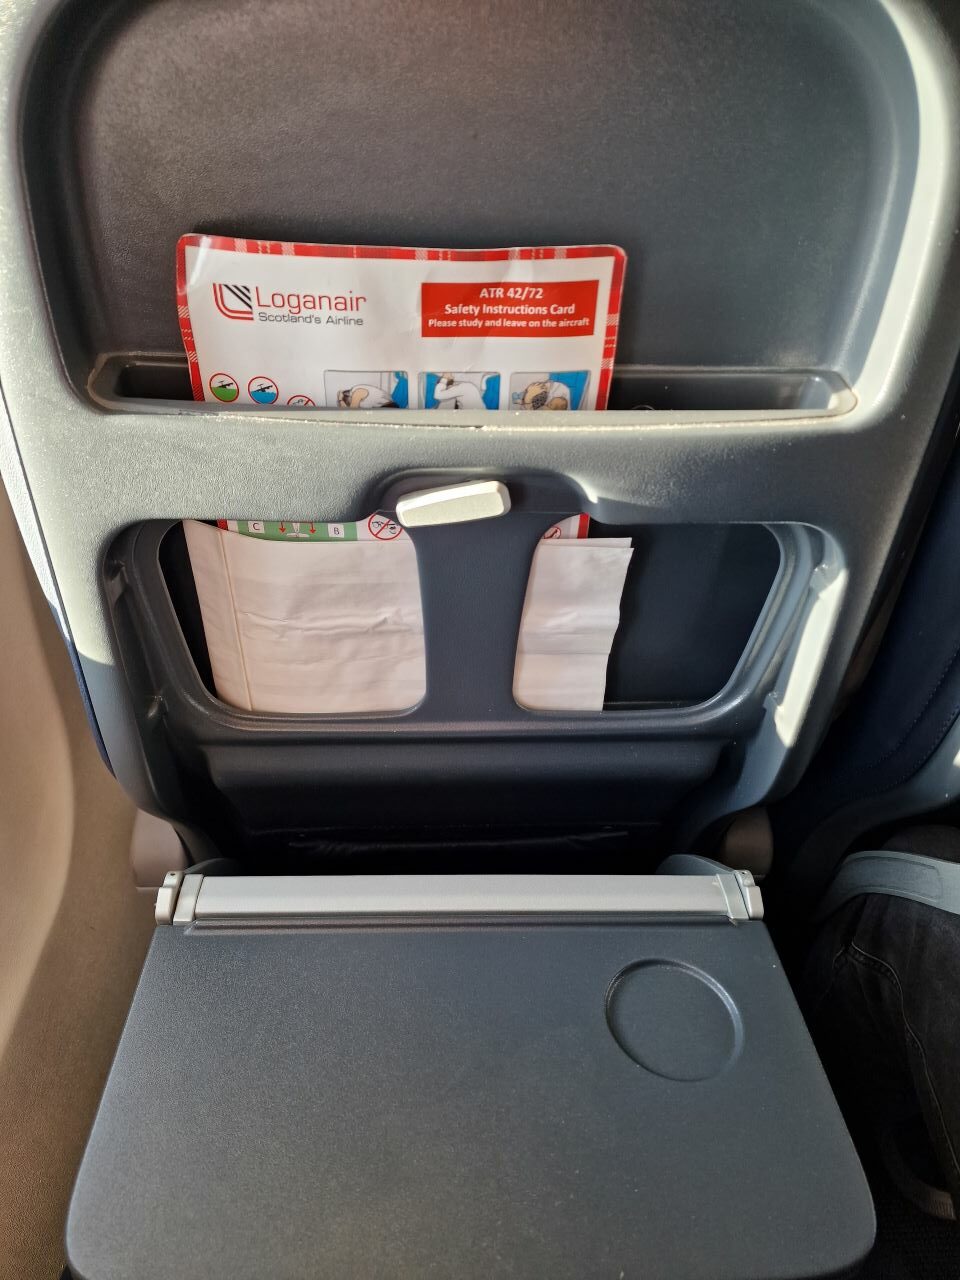 Loganair ATR-42 Tray Table and Seat Back